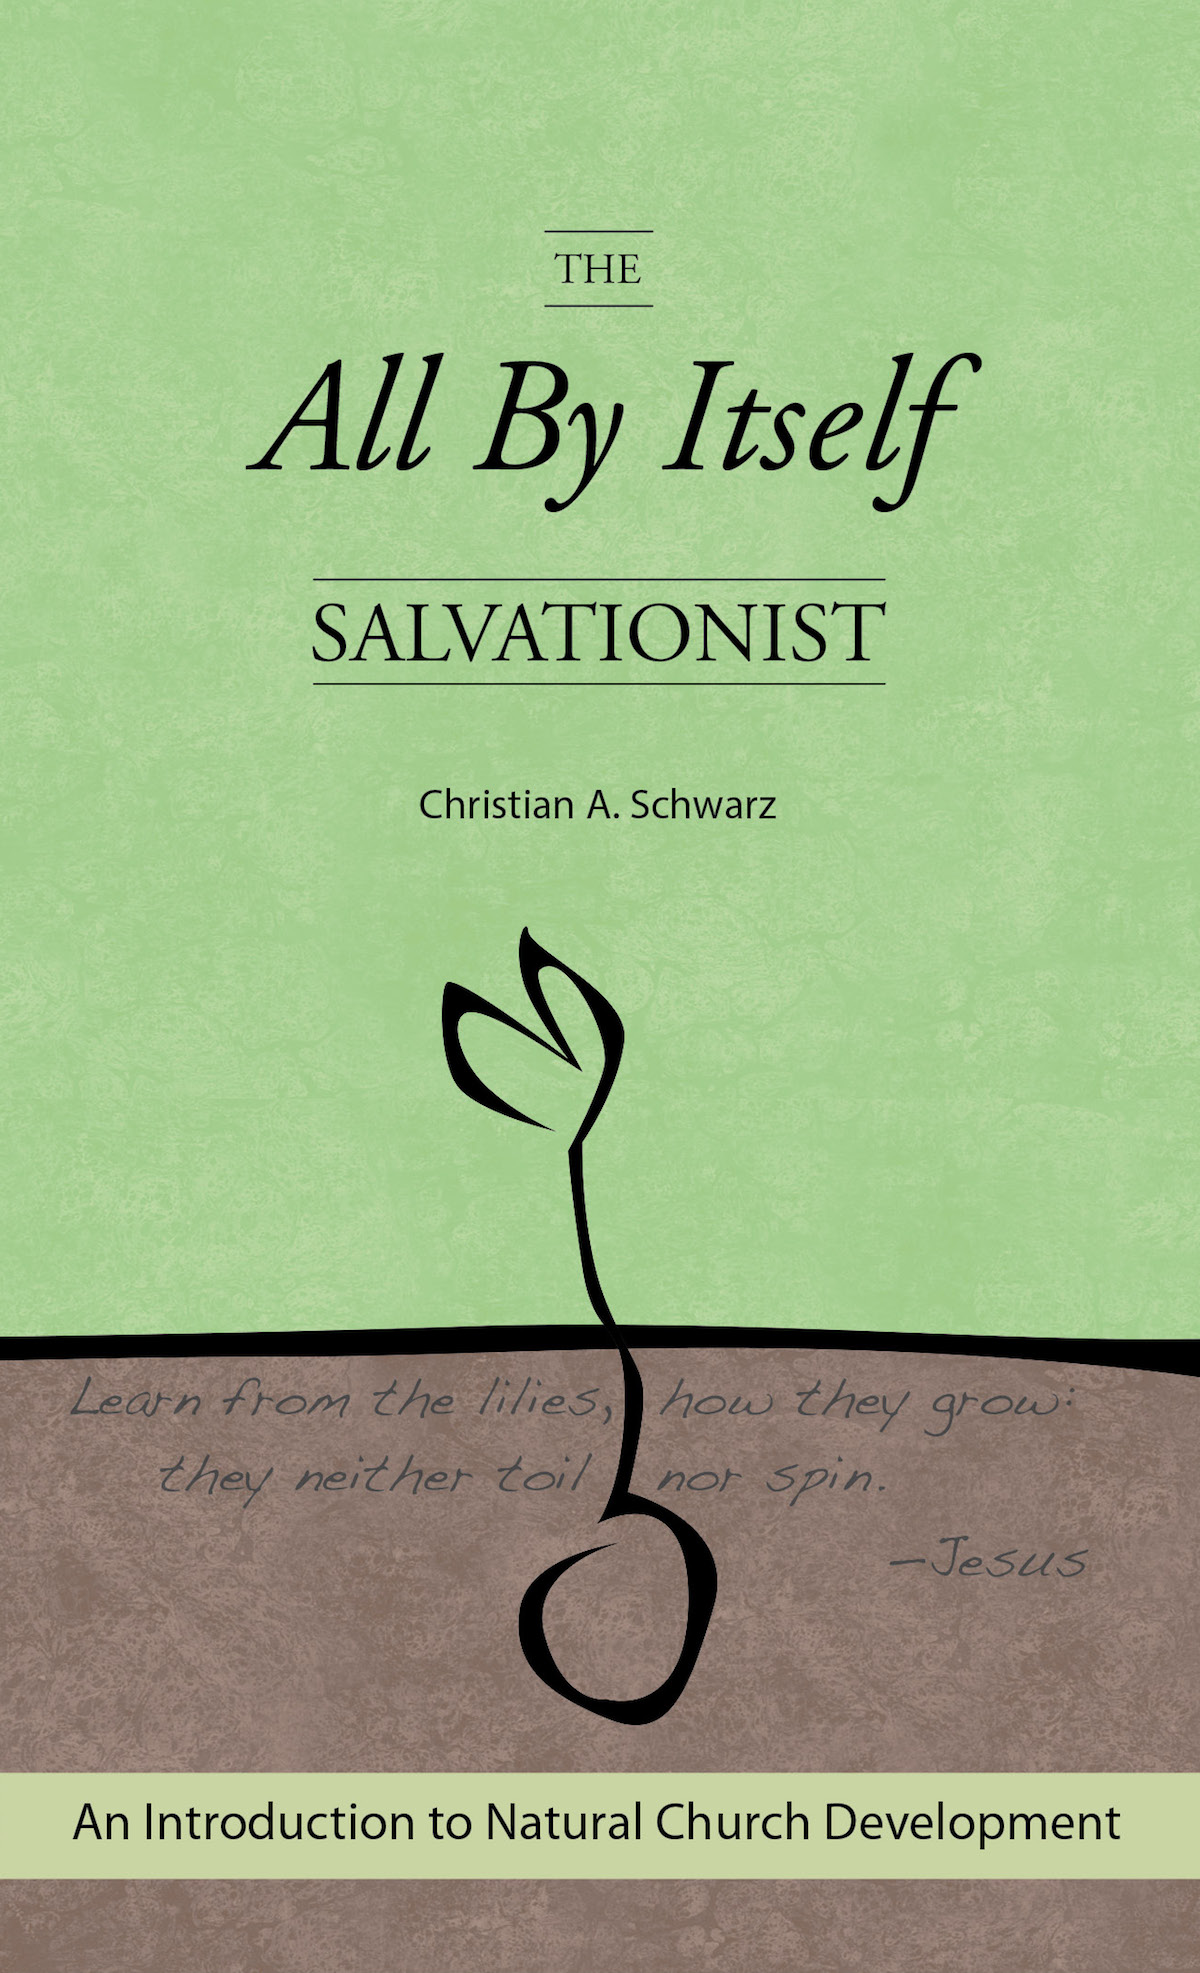 The All By Itself Salvationist